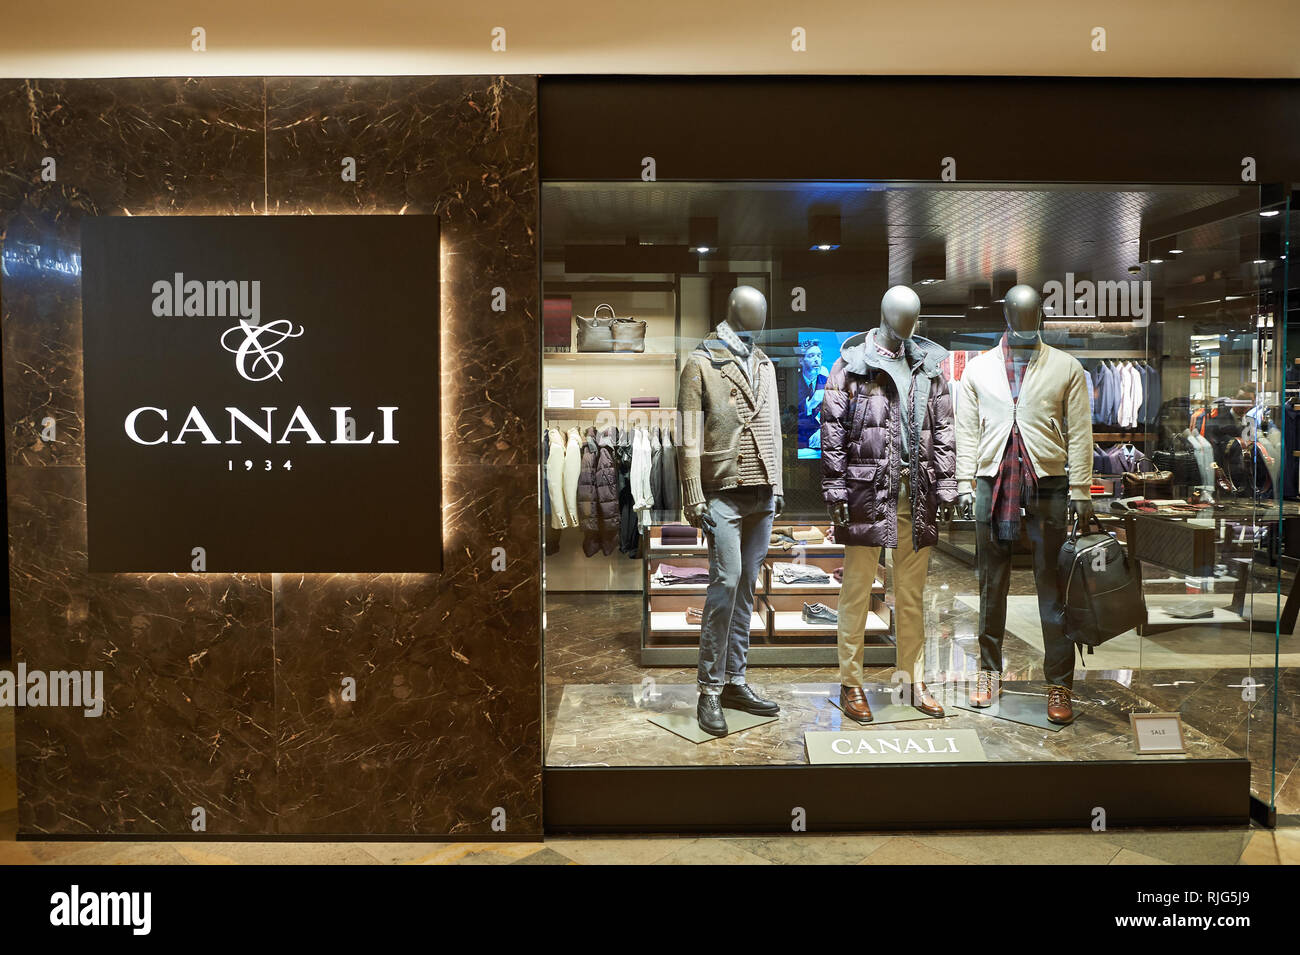 Canali Store High Resolution Stock Photography and Images - Alamy